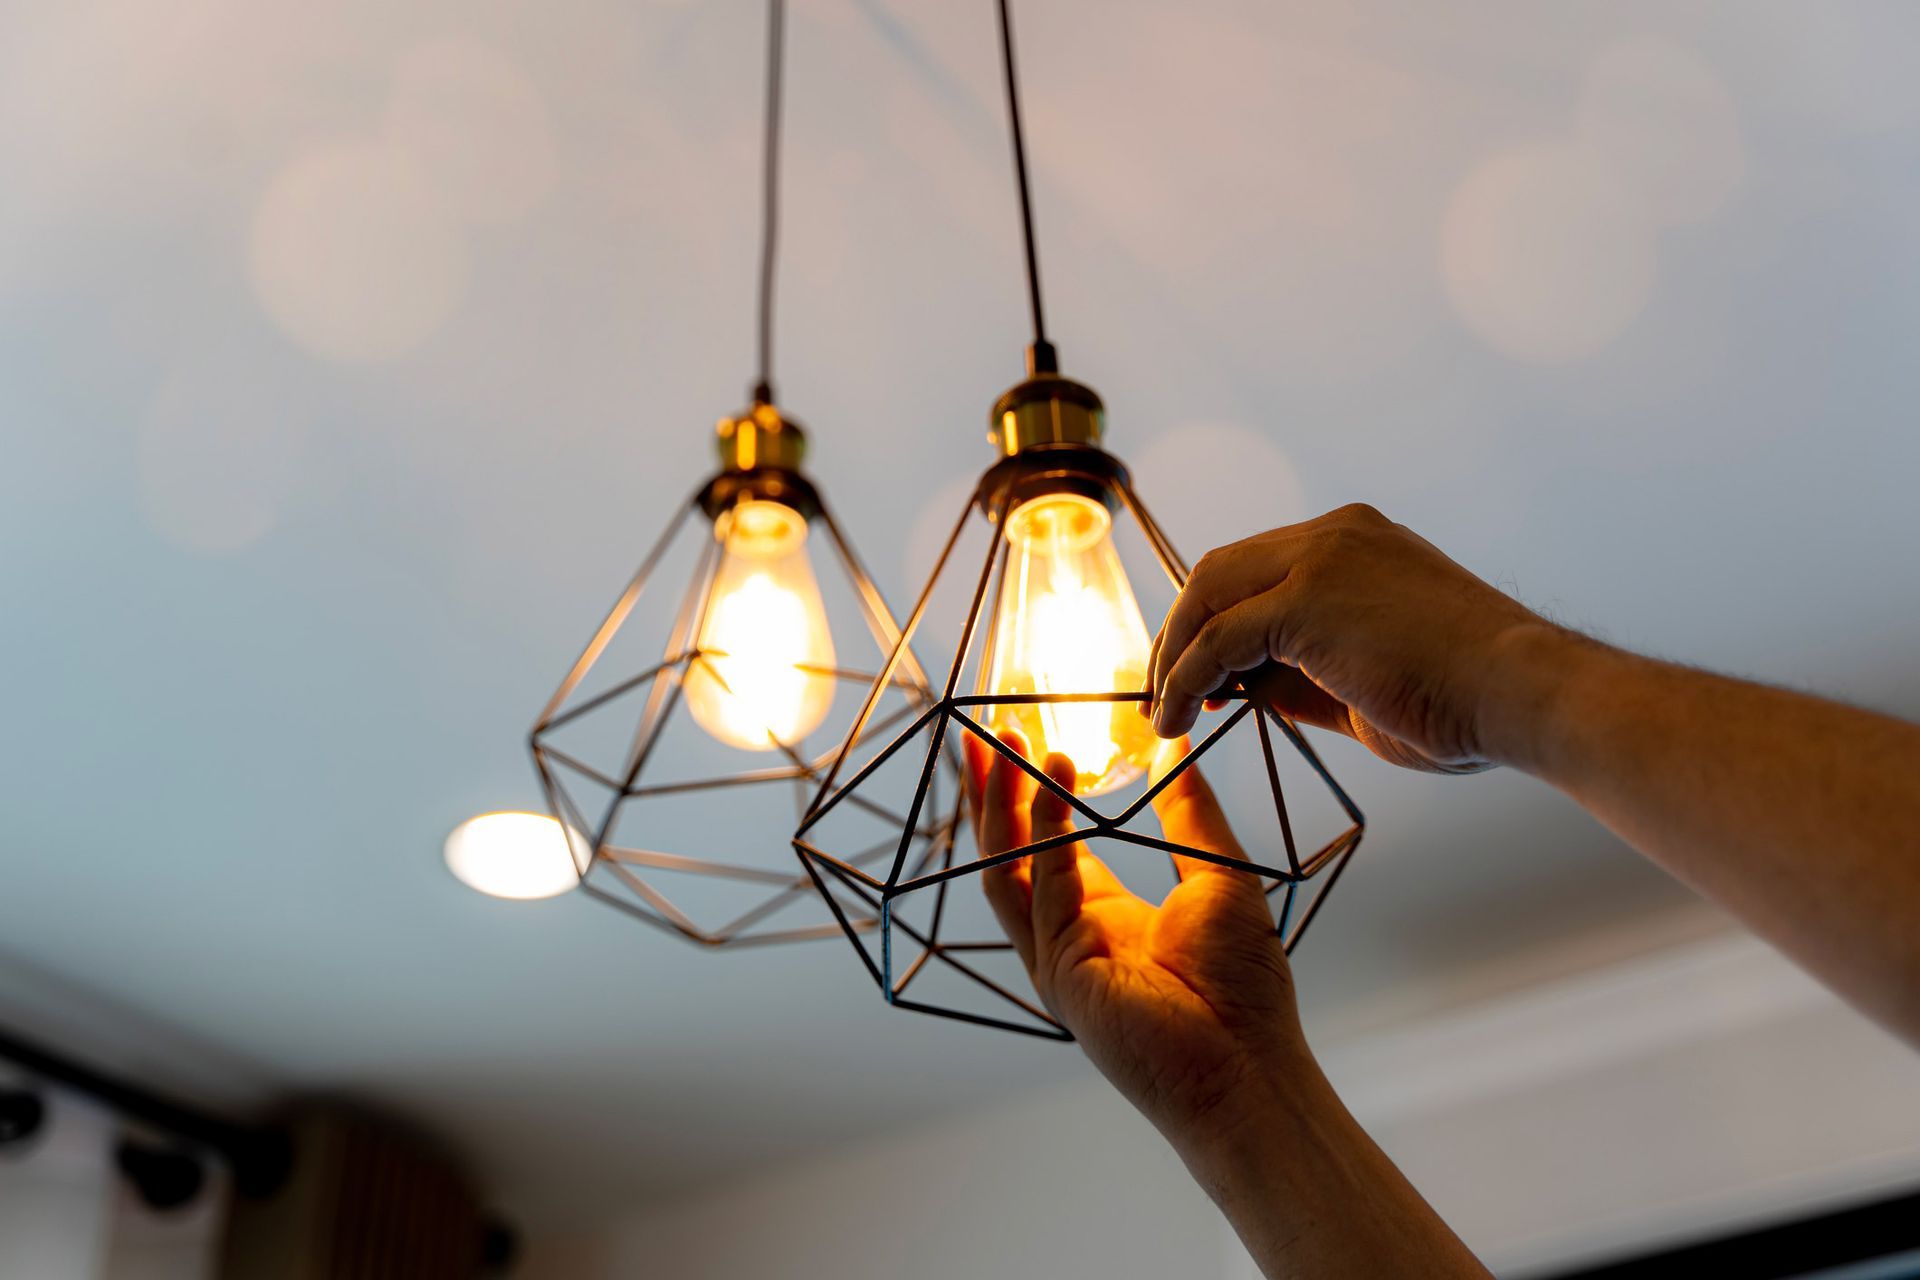 Decorative style filament light bulbs installation | Darling Downs, QLD | Jasmak Electrical Specialists